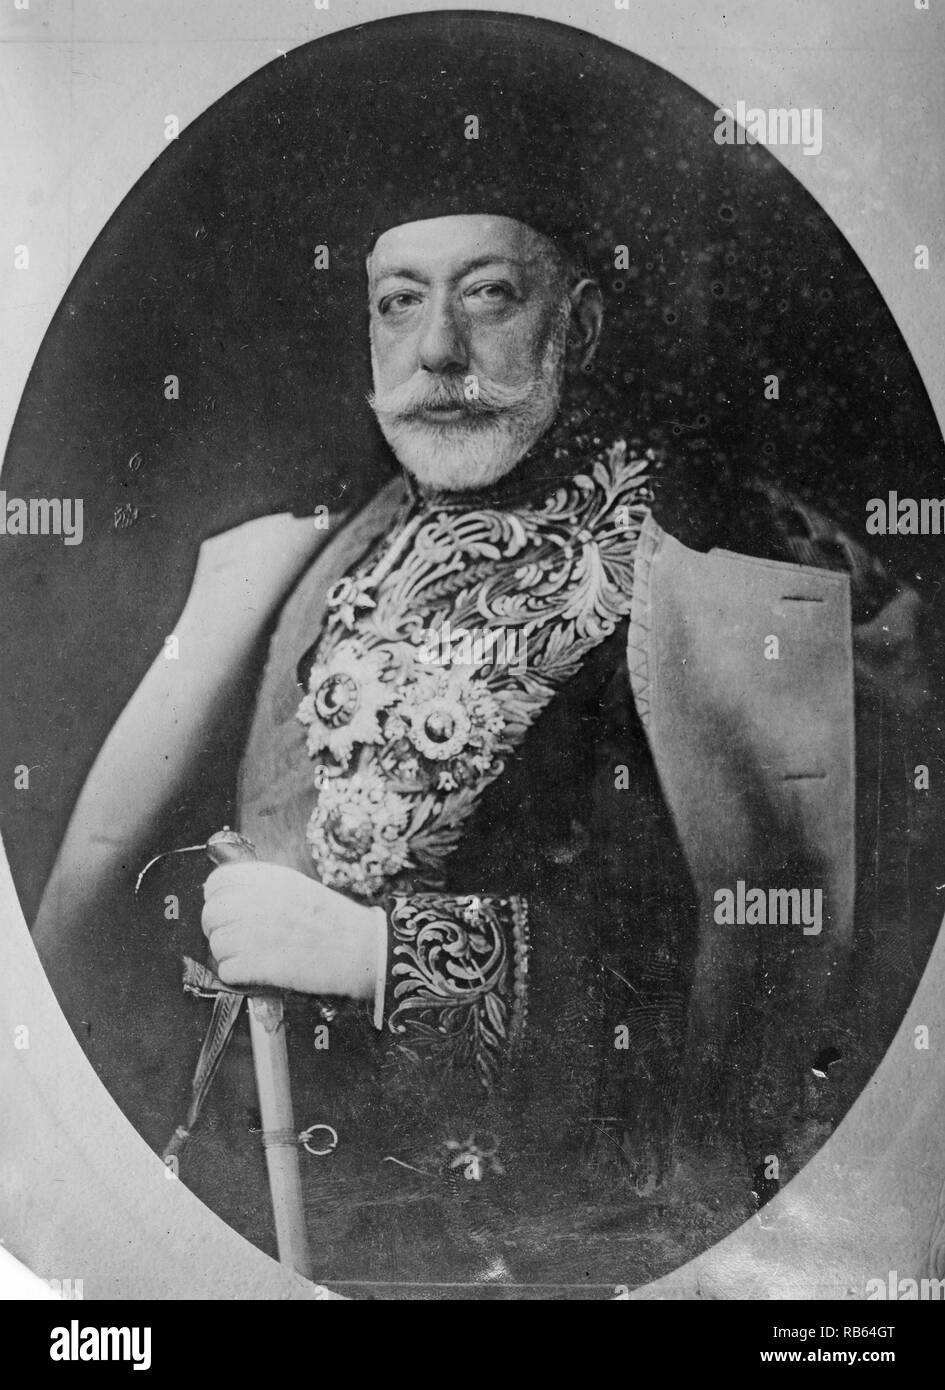 Mehmed V Reshad November 1844 - 3/4 July 1918) 35th Ottoman Sultan. He was the son of Sultan Abdulmecid I. He was succeeded by his half-brother Mehmed VI. Stock Photo